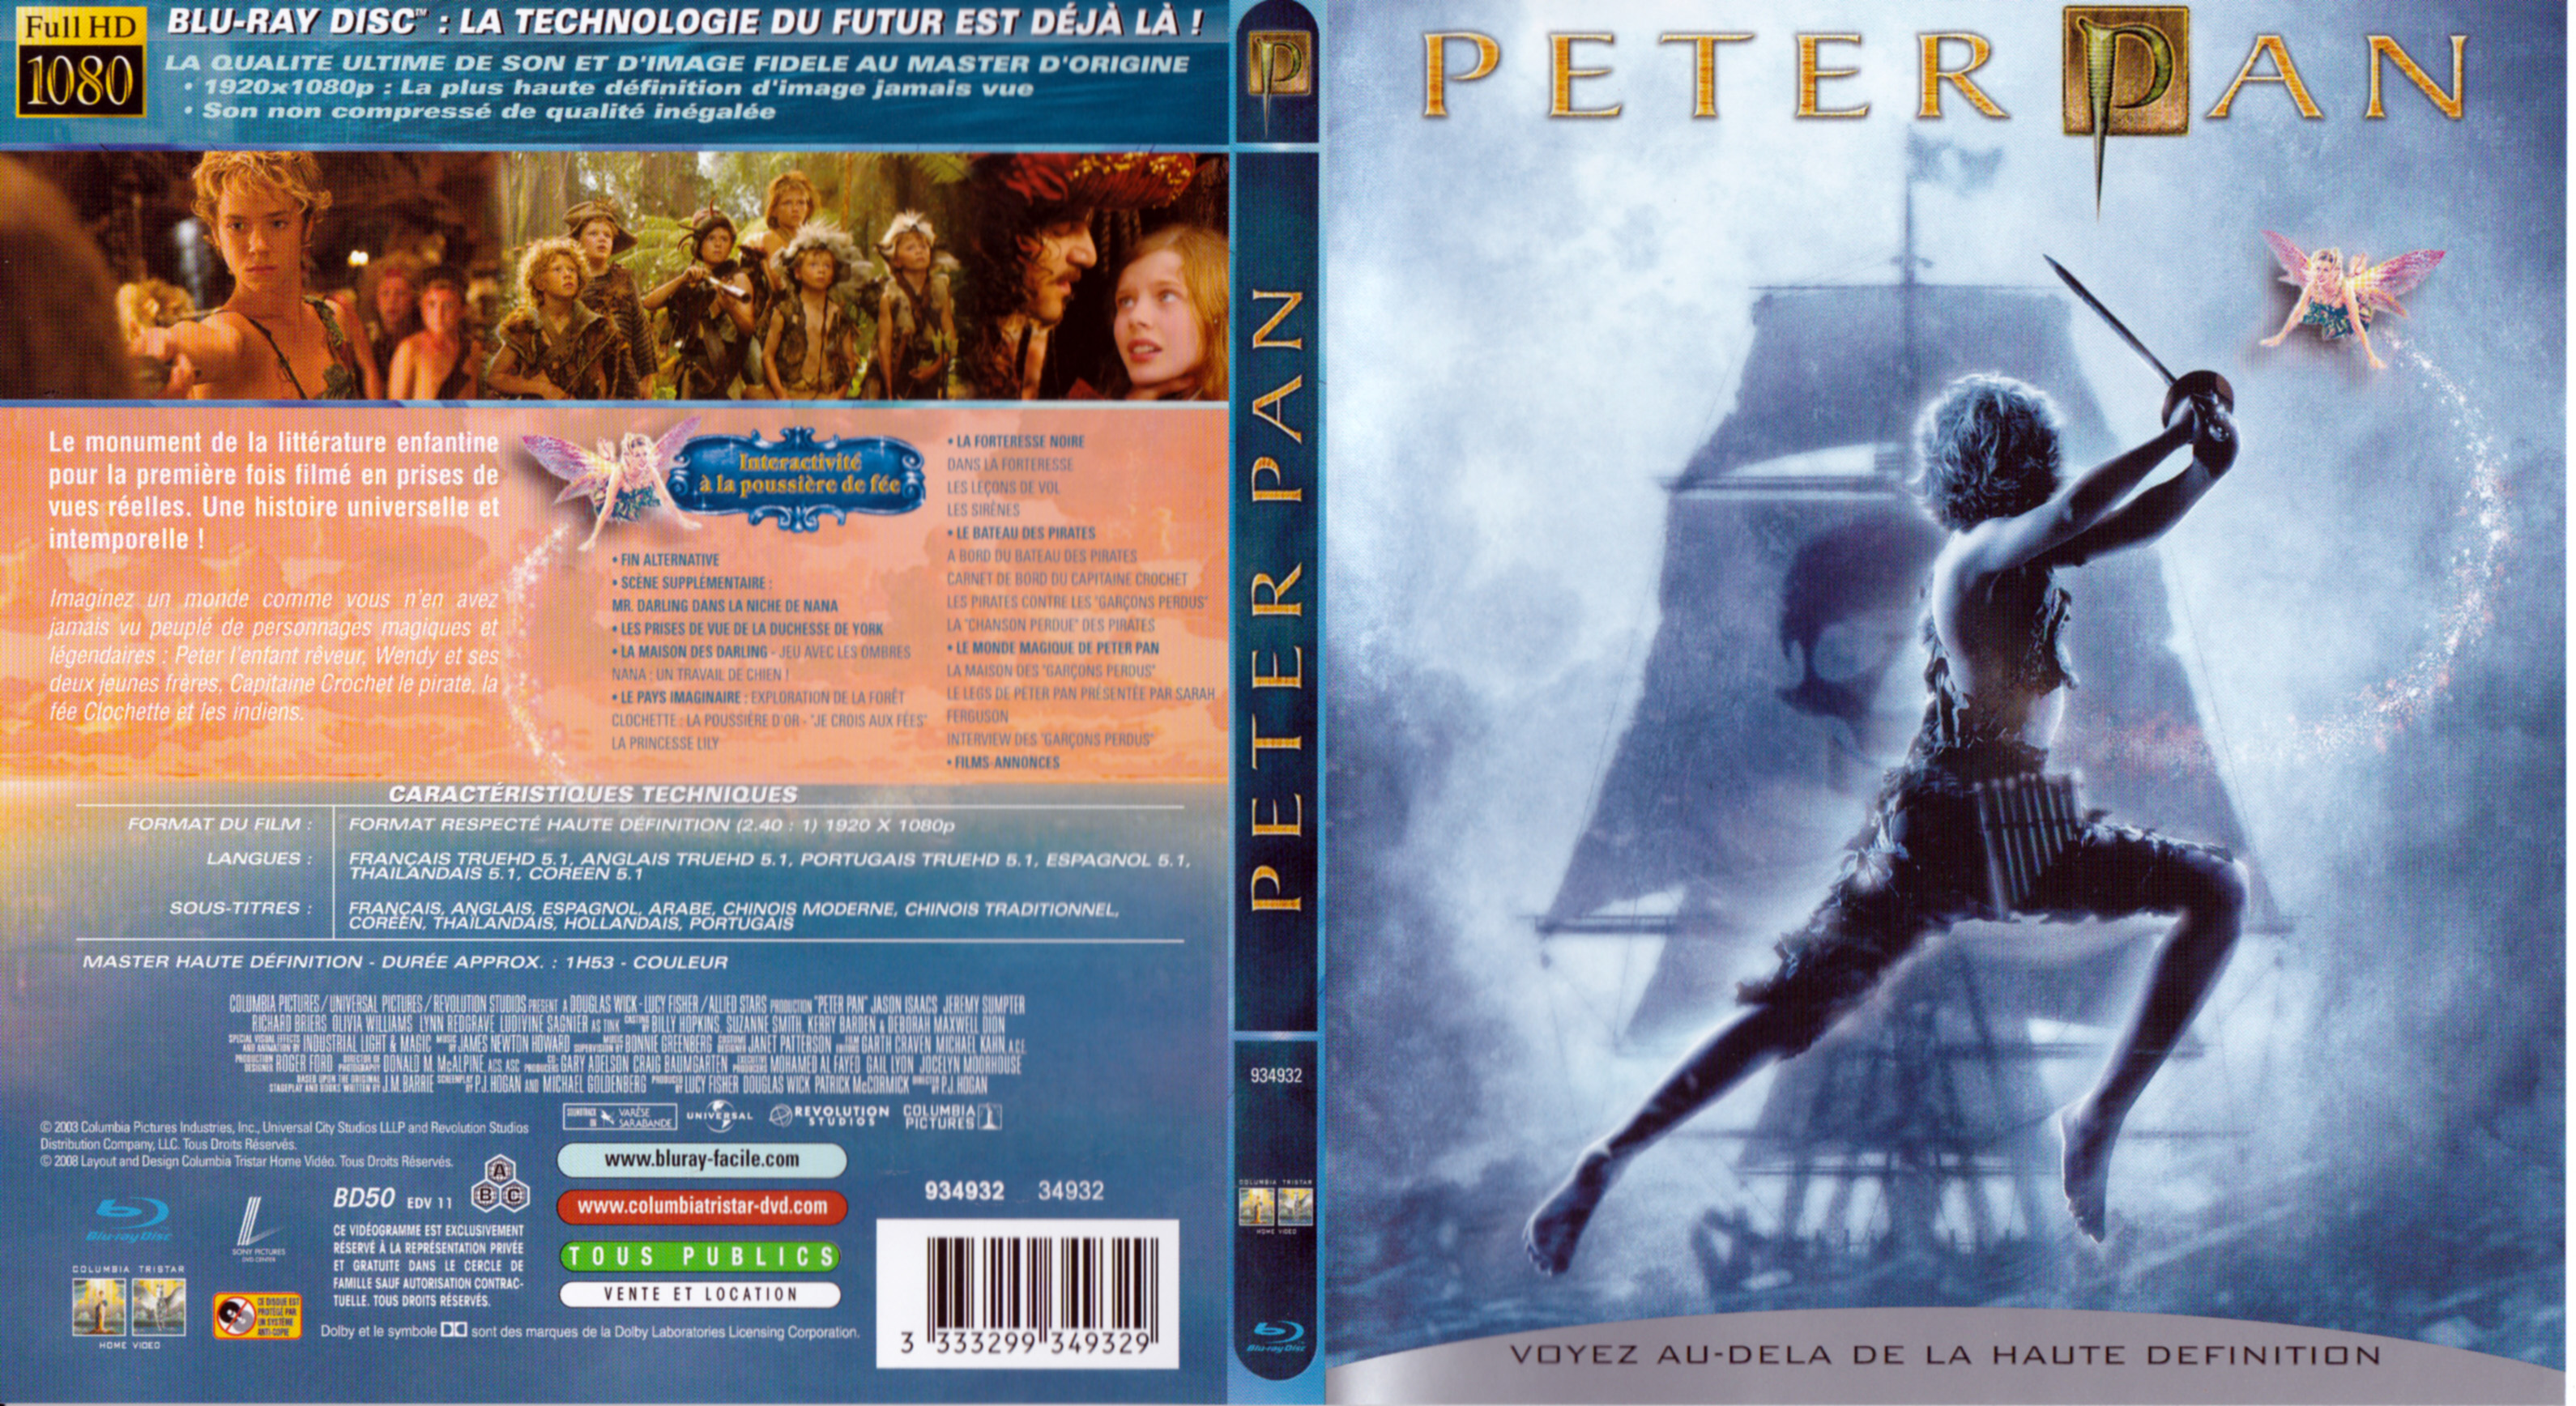 Jaquette DVD Peter Pan Le Film (BLU-RAY)